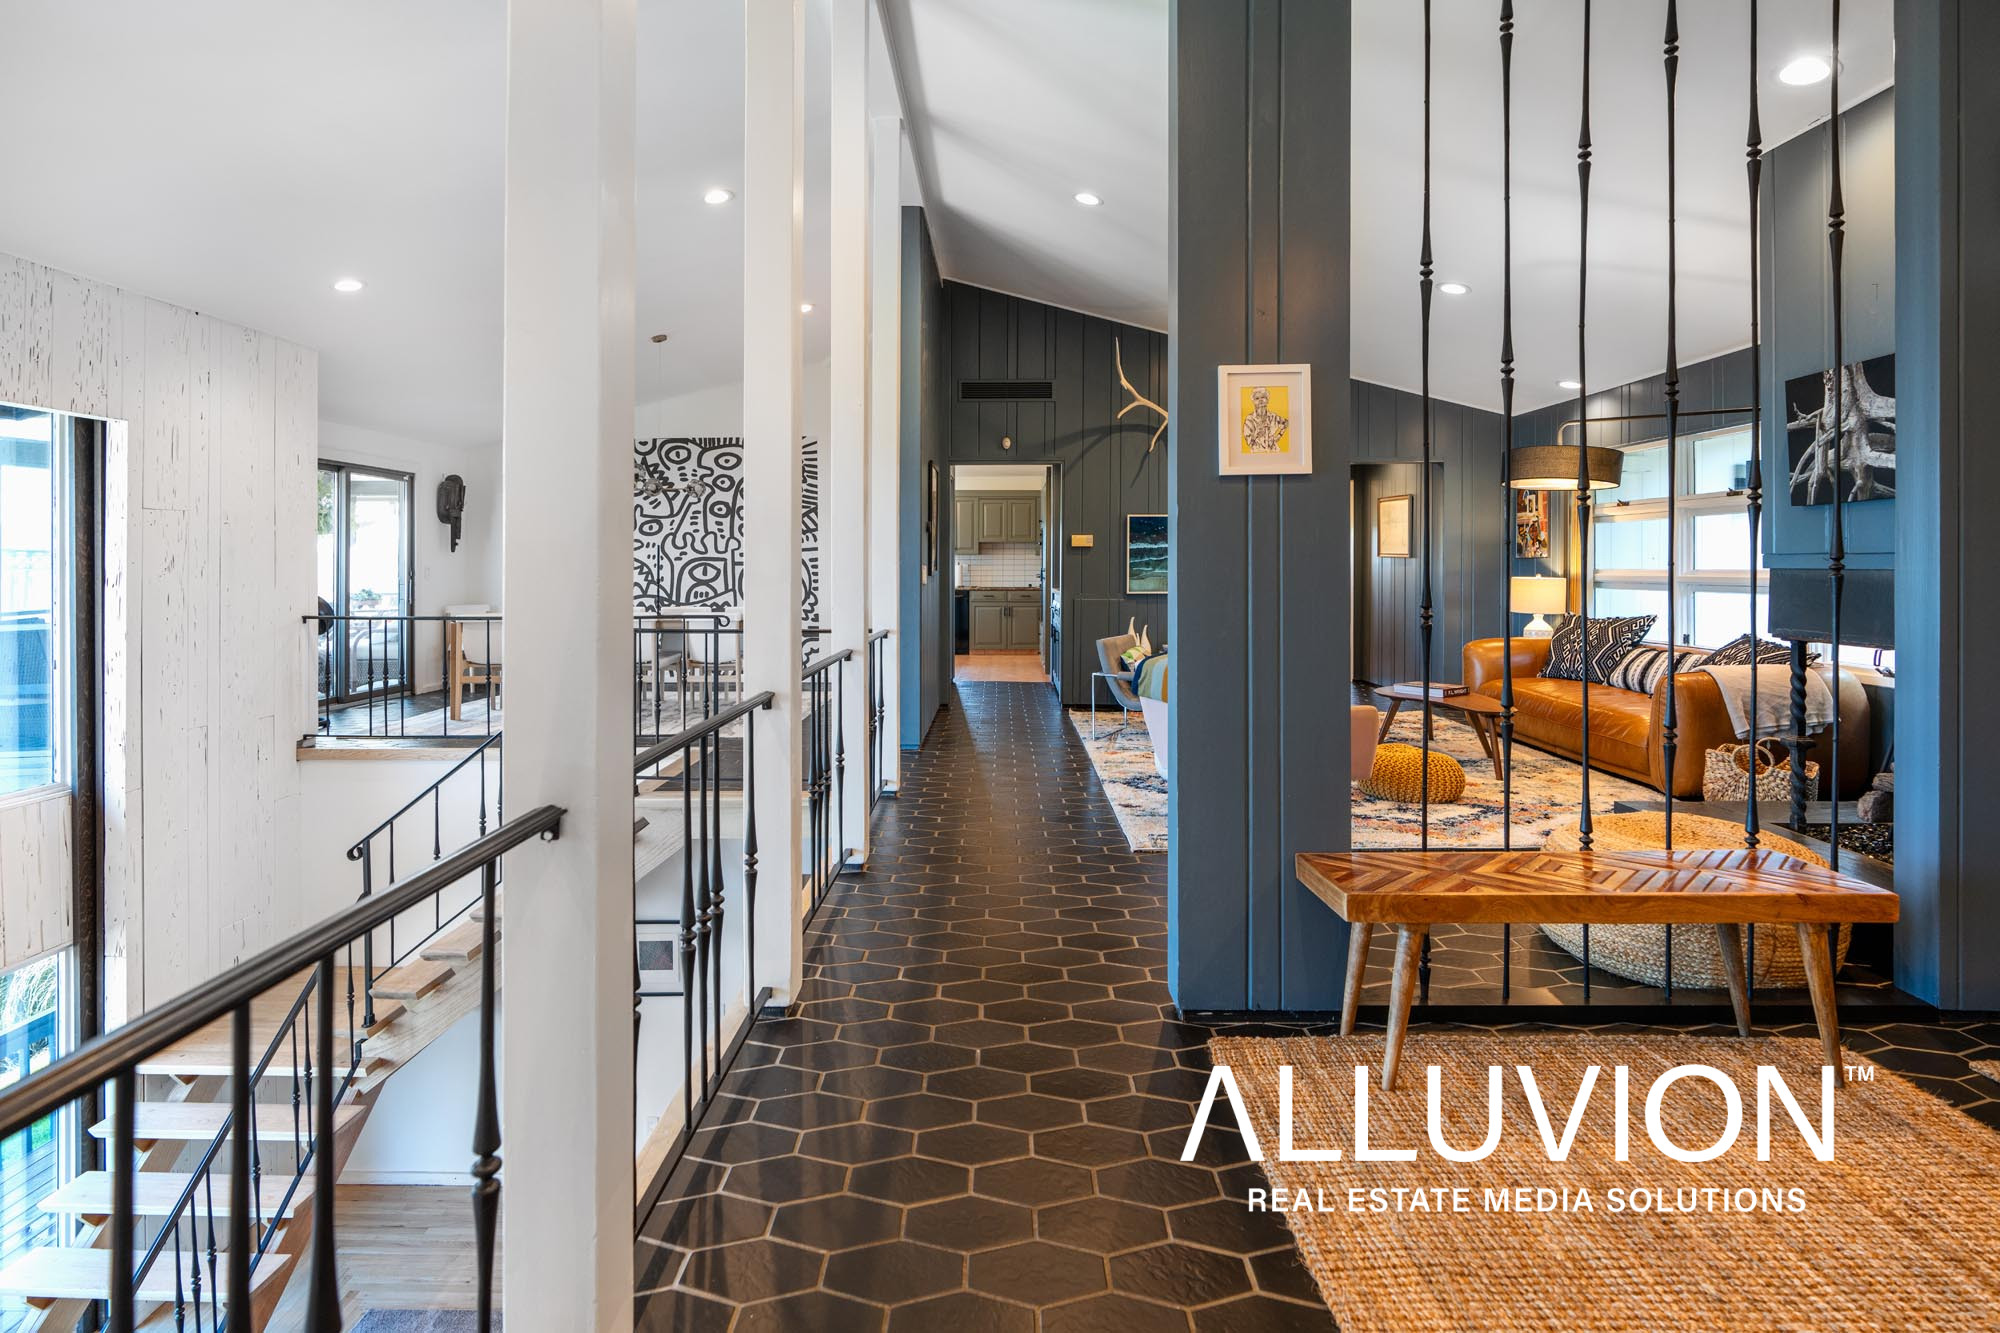 Alluvion Media: Where Photographic Artistry Meets Brand Narrative – Luxury Hospitality Photography in New York City, the Hudson Valley, Catskills, and the Hamptons